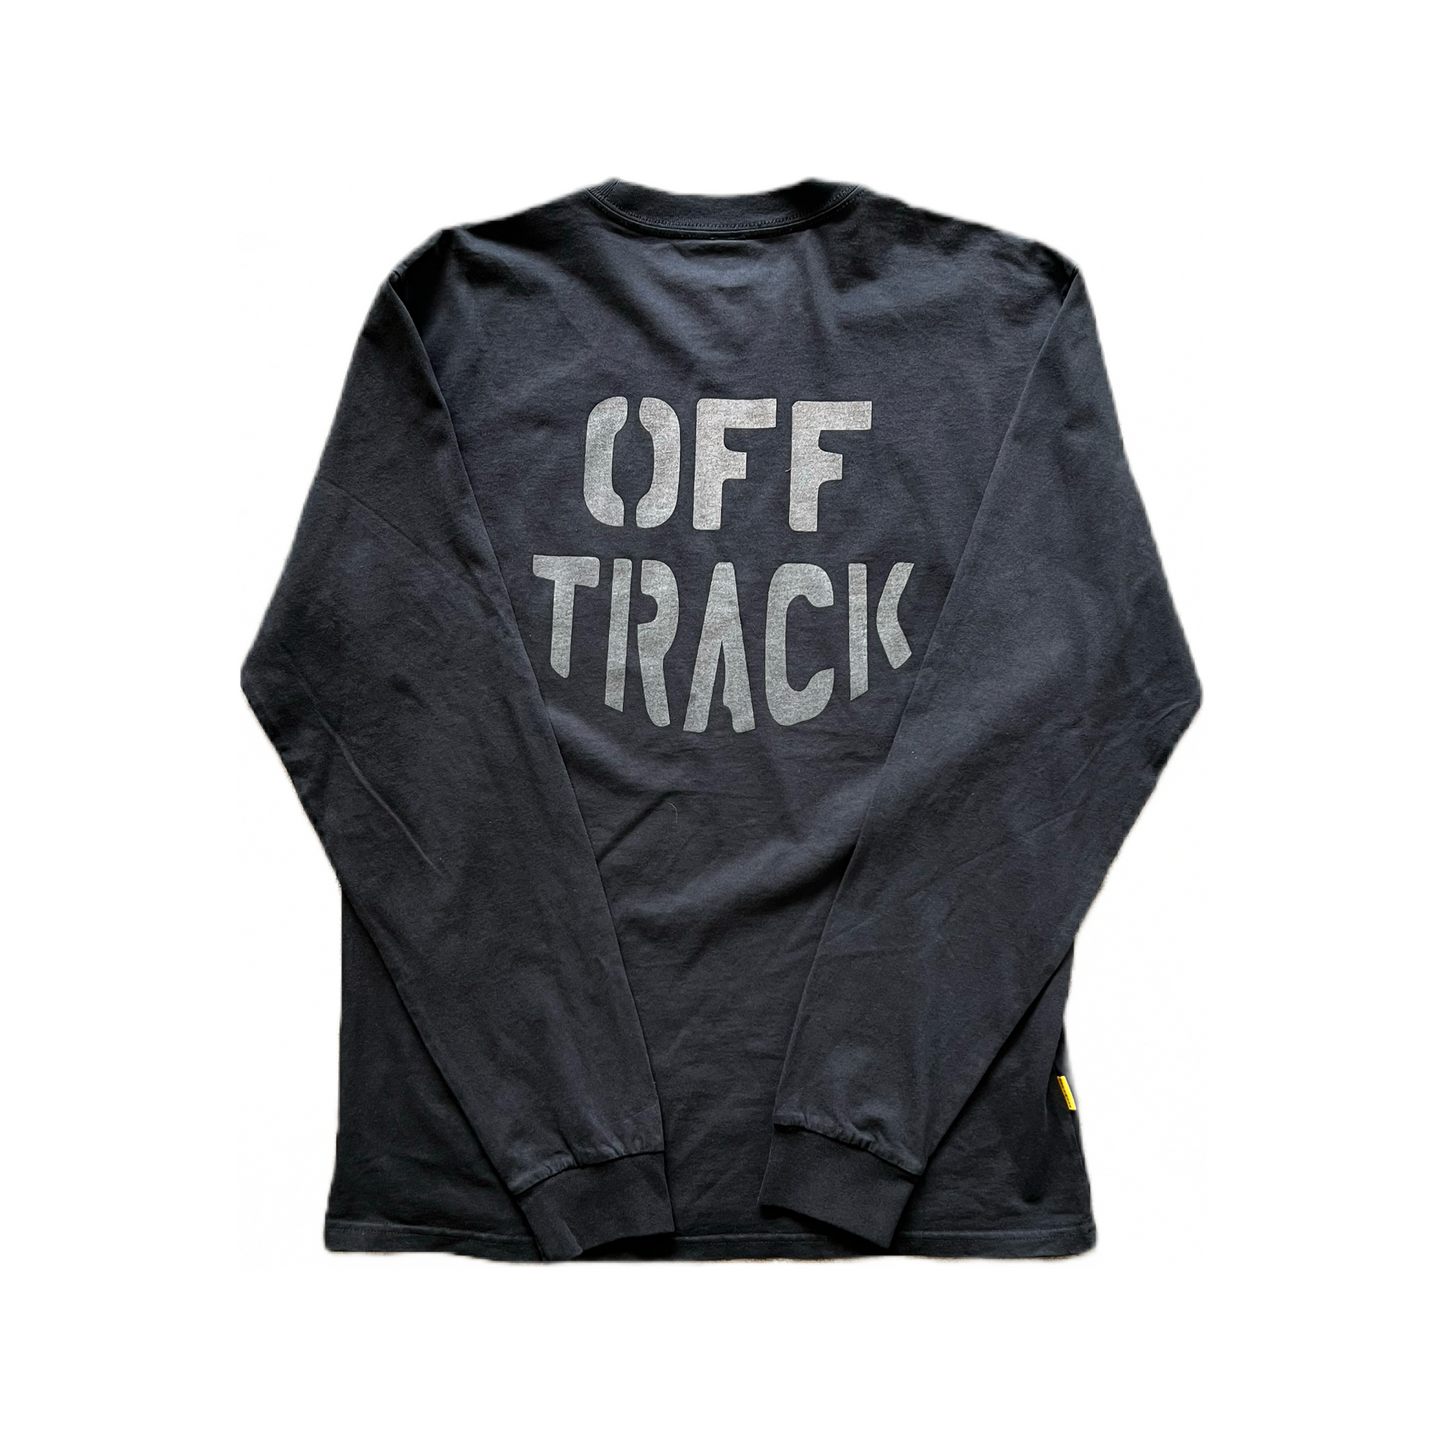 OFF TRACK REFLECTIVE STENCIL FADED BLACK LONG SLEEVE